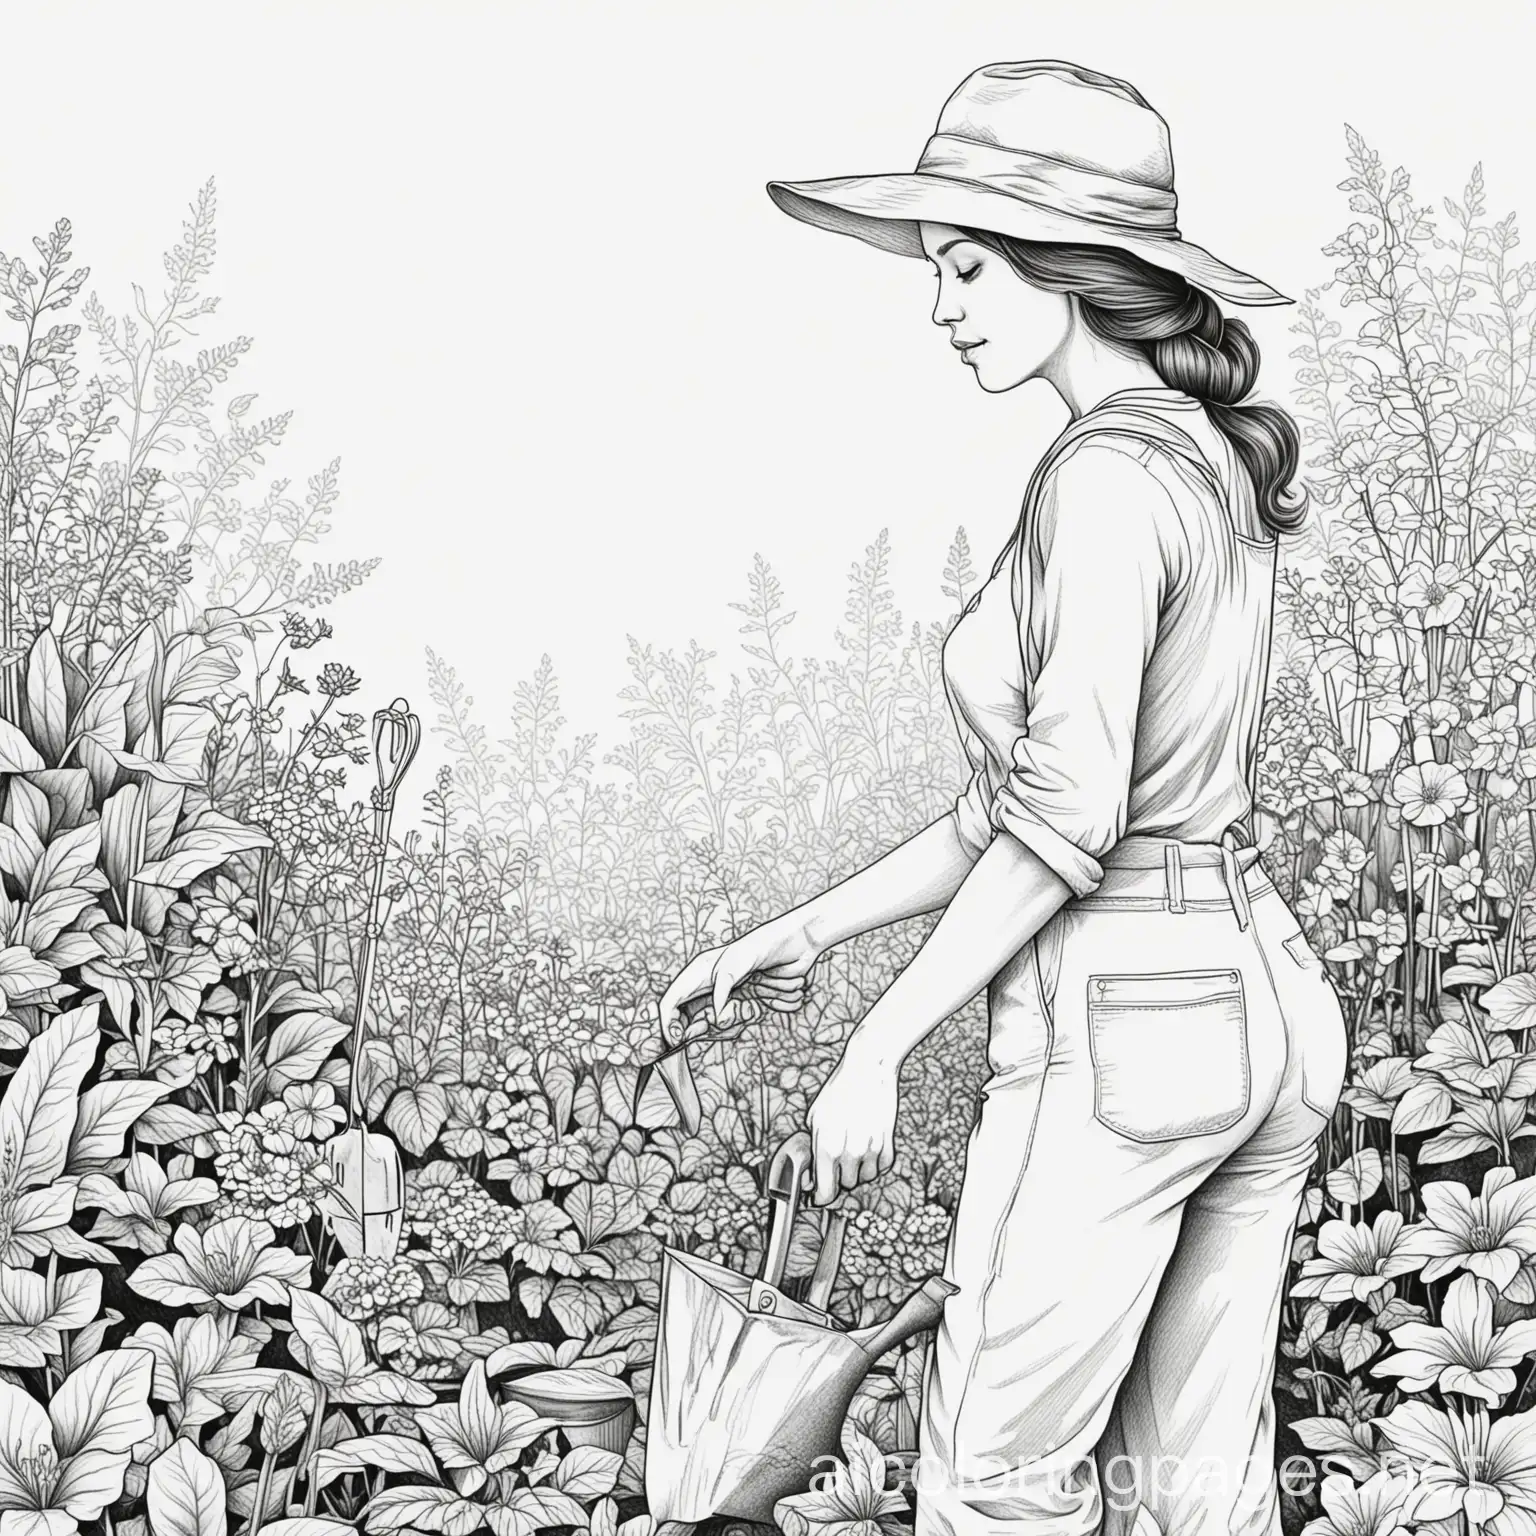 COLORING PAGE OF WOMAN gardening, Coloring Page, black and white, line art, white background, Simplicity, Ample White Space.